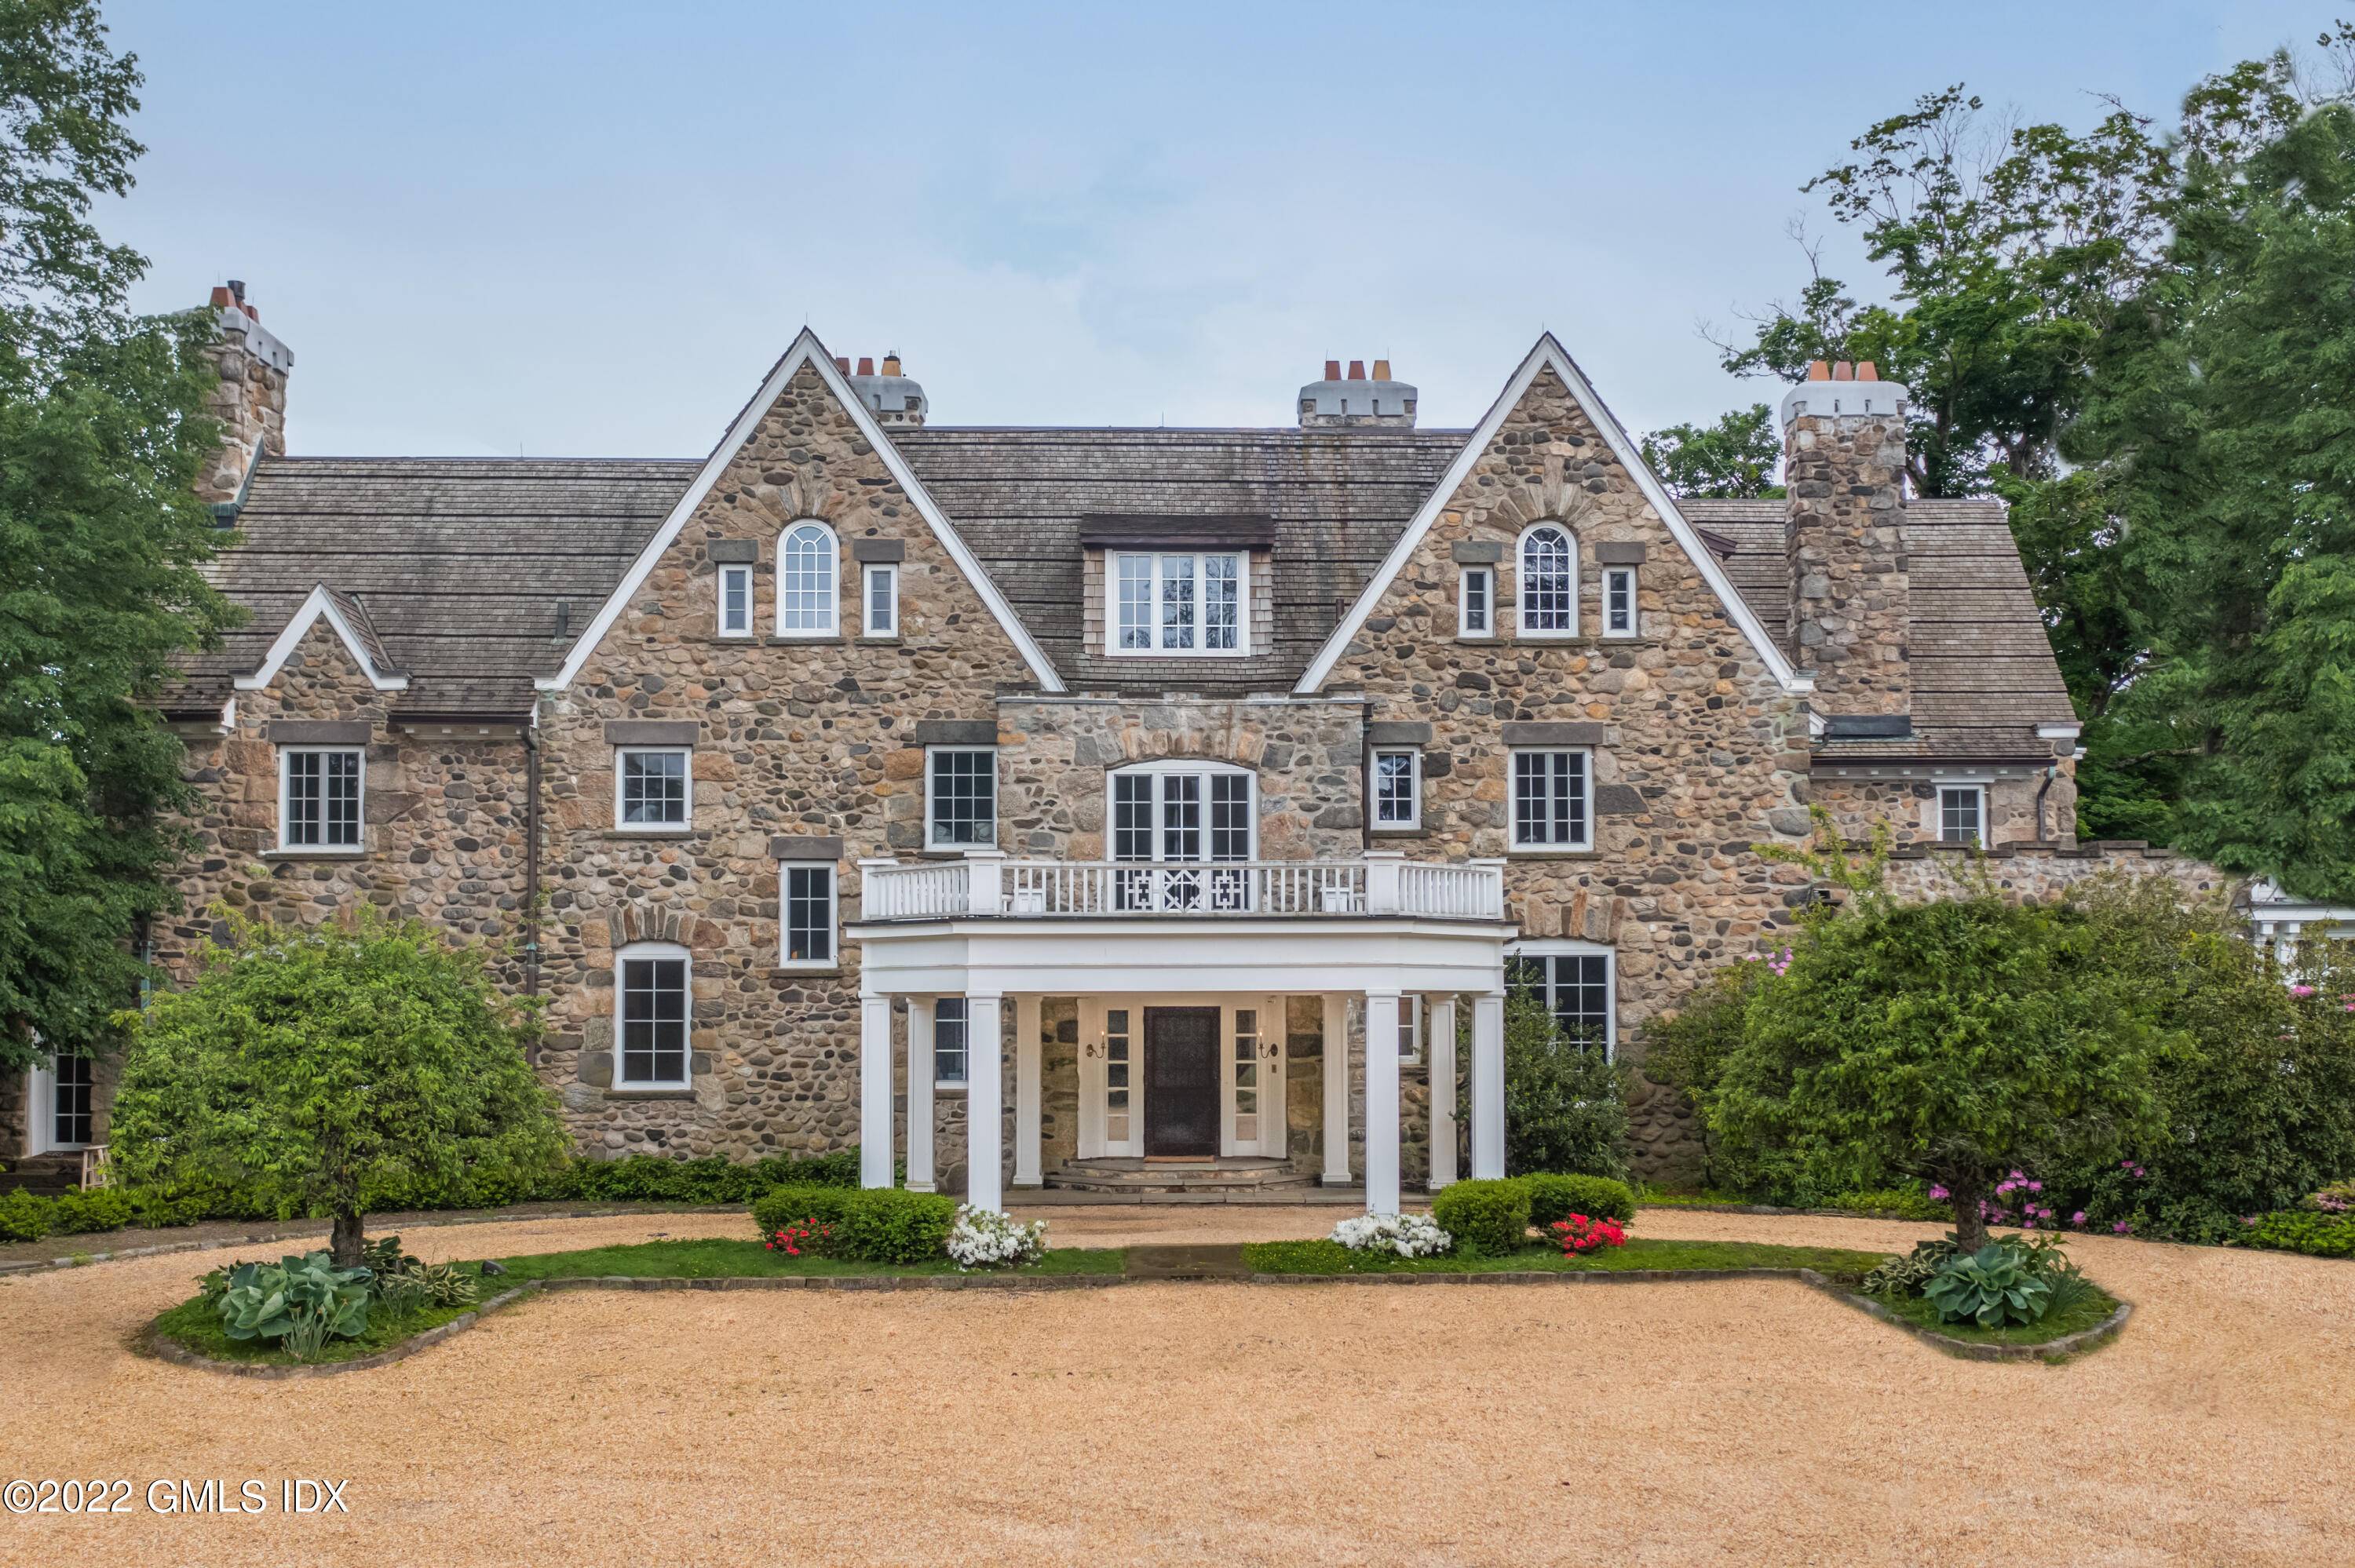 A truly breathtaking remodel of a 1906 masterpiece Brae Burn Farm, one of the most exquisite and well preserved estates in Greenwich, is offered after extensive renovation.